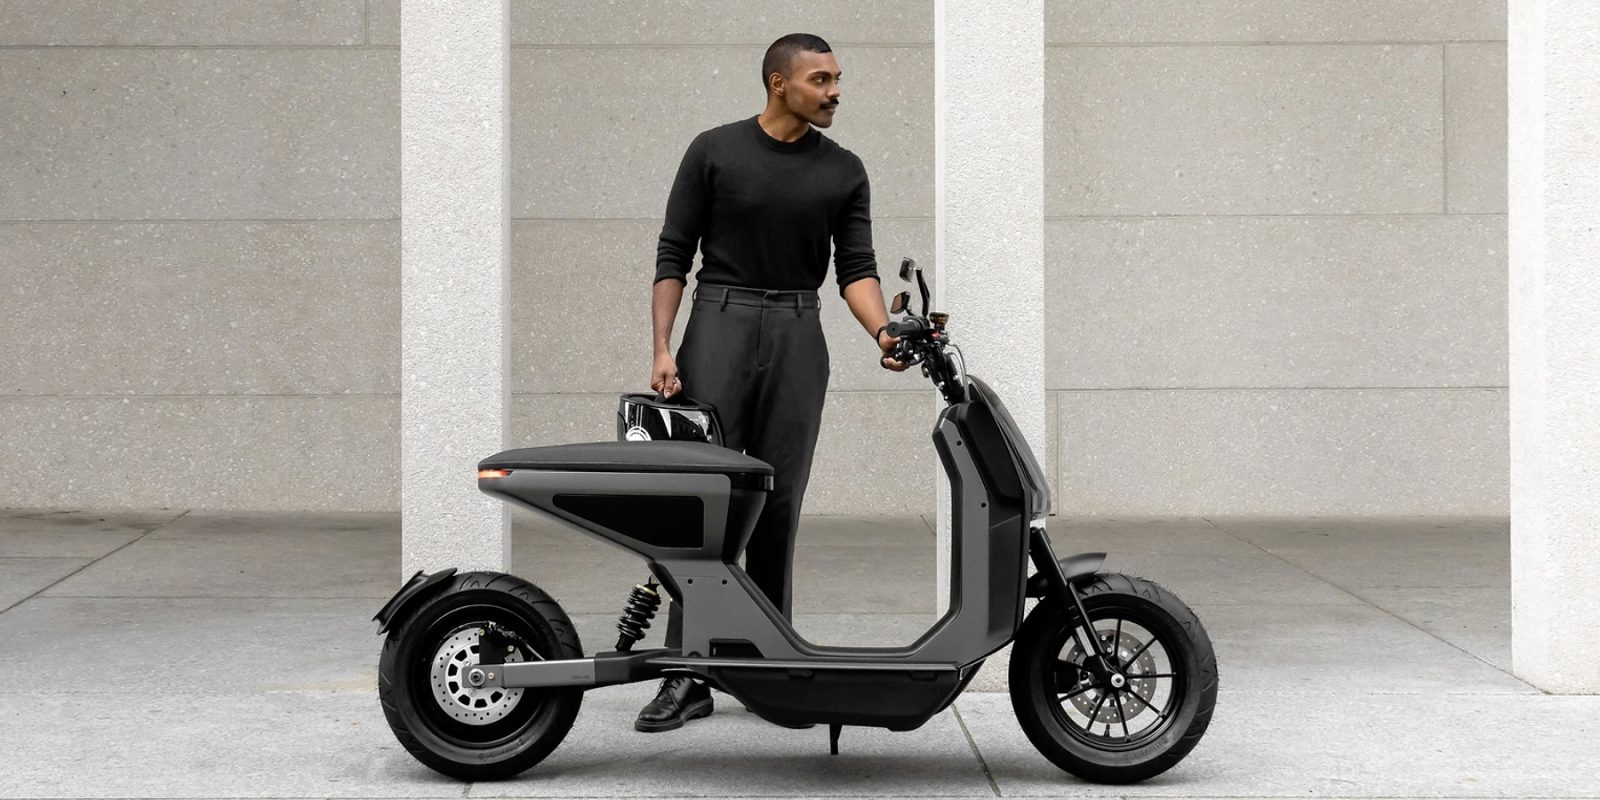 rense heks tapet 62 MPH German electric scooter unveiled with distinctive new design